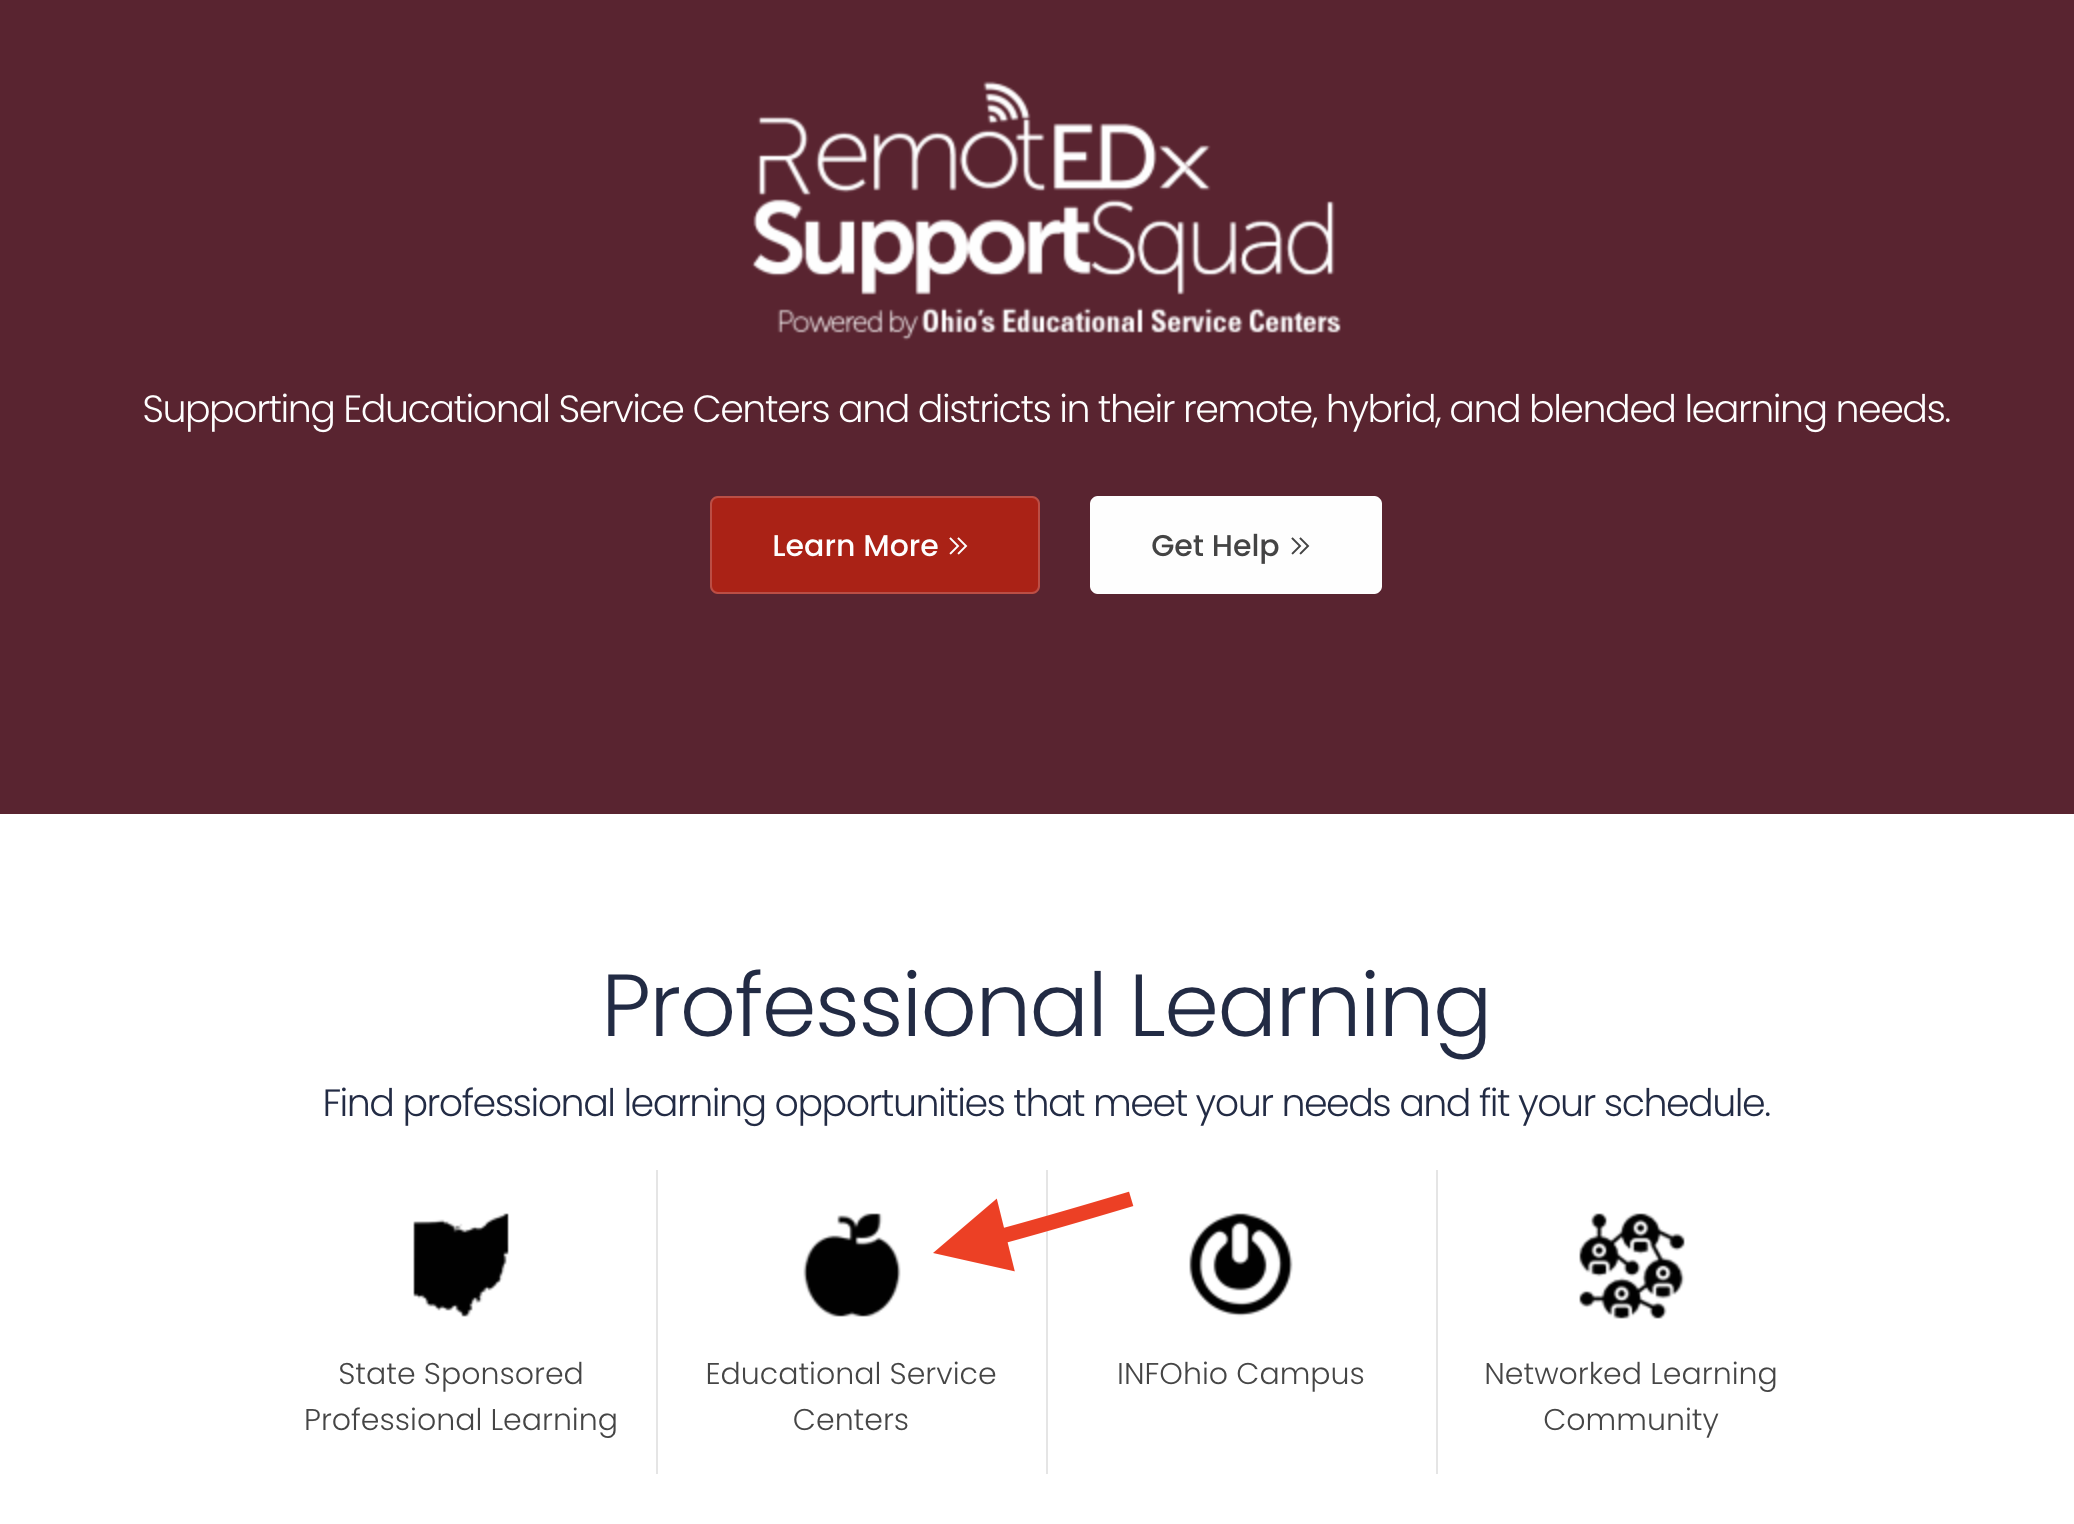 Professional Learning Opportunities from the RemotEDx Support Squad